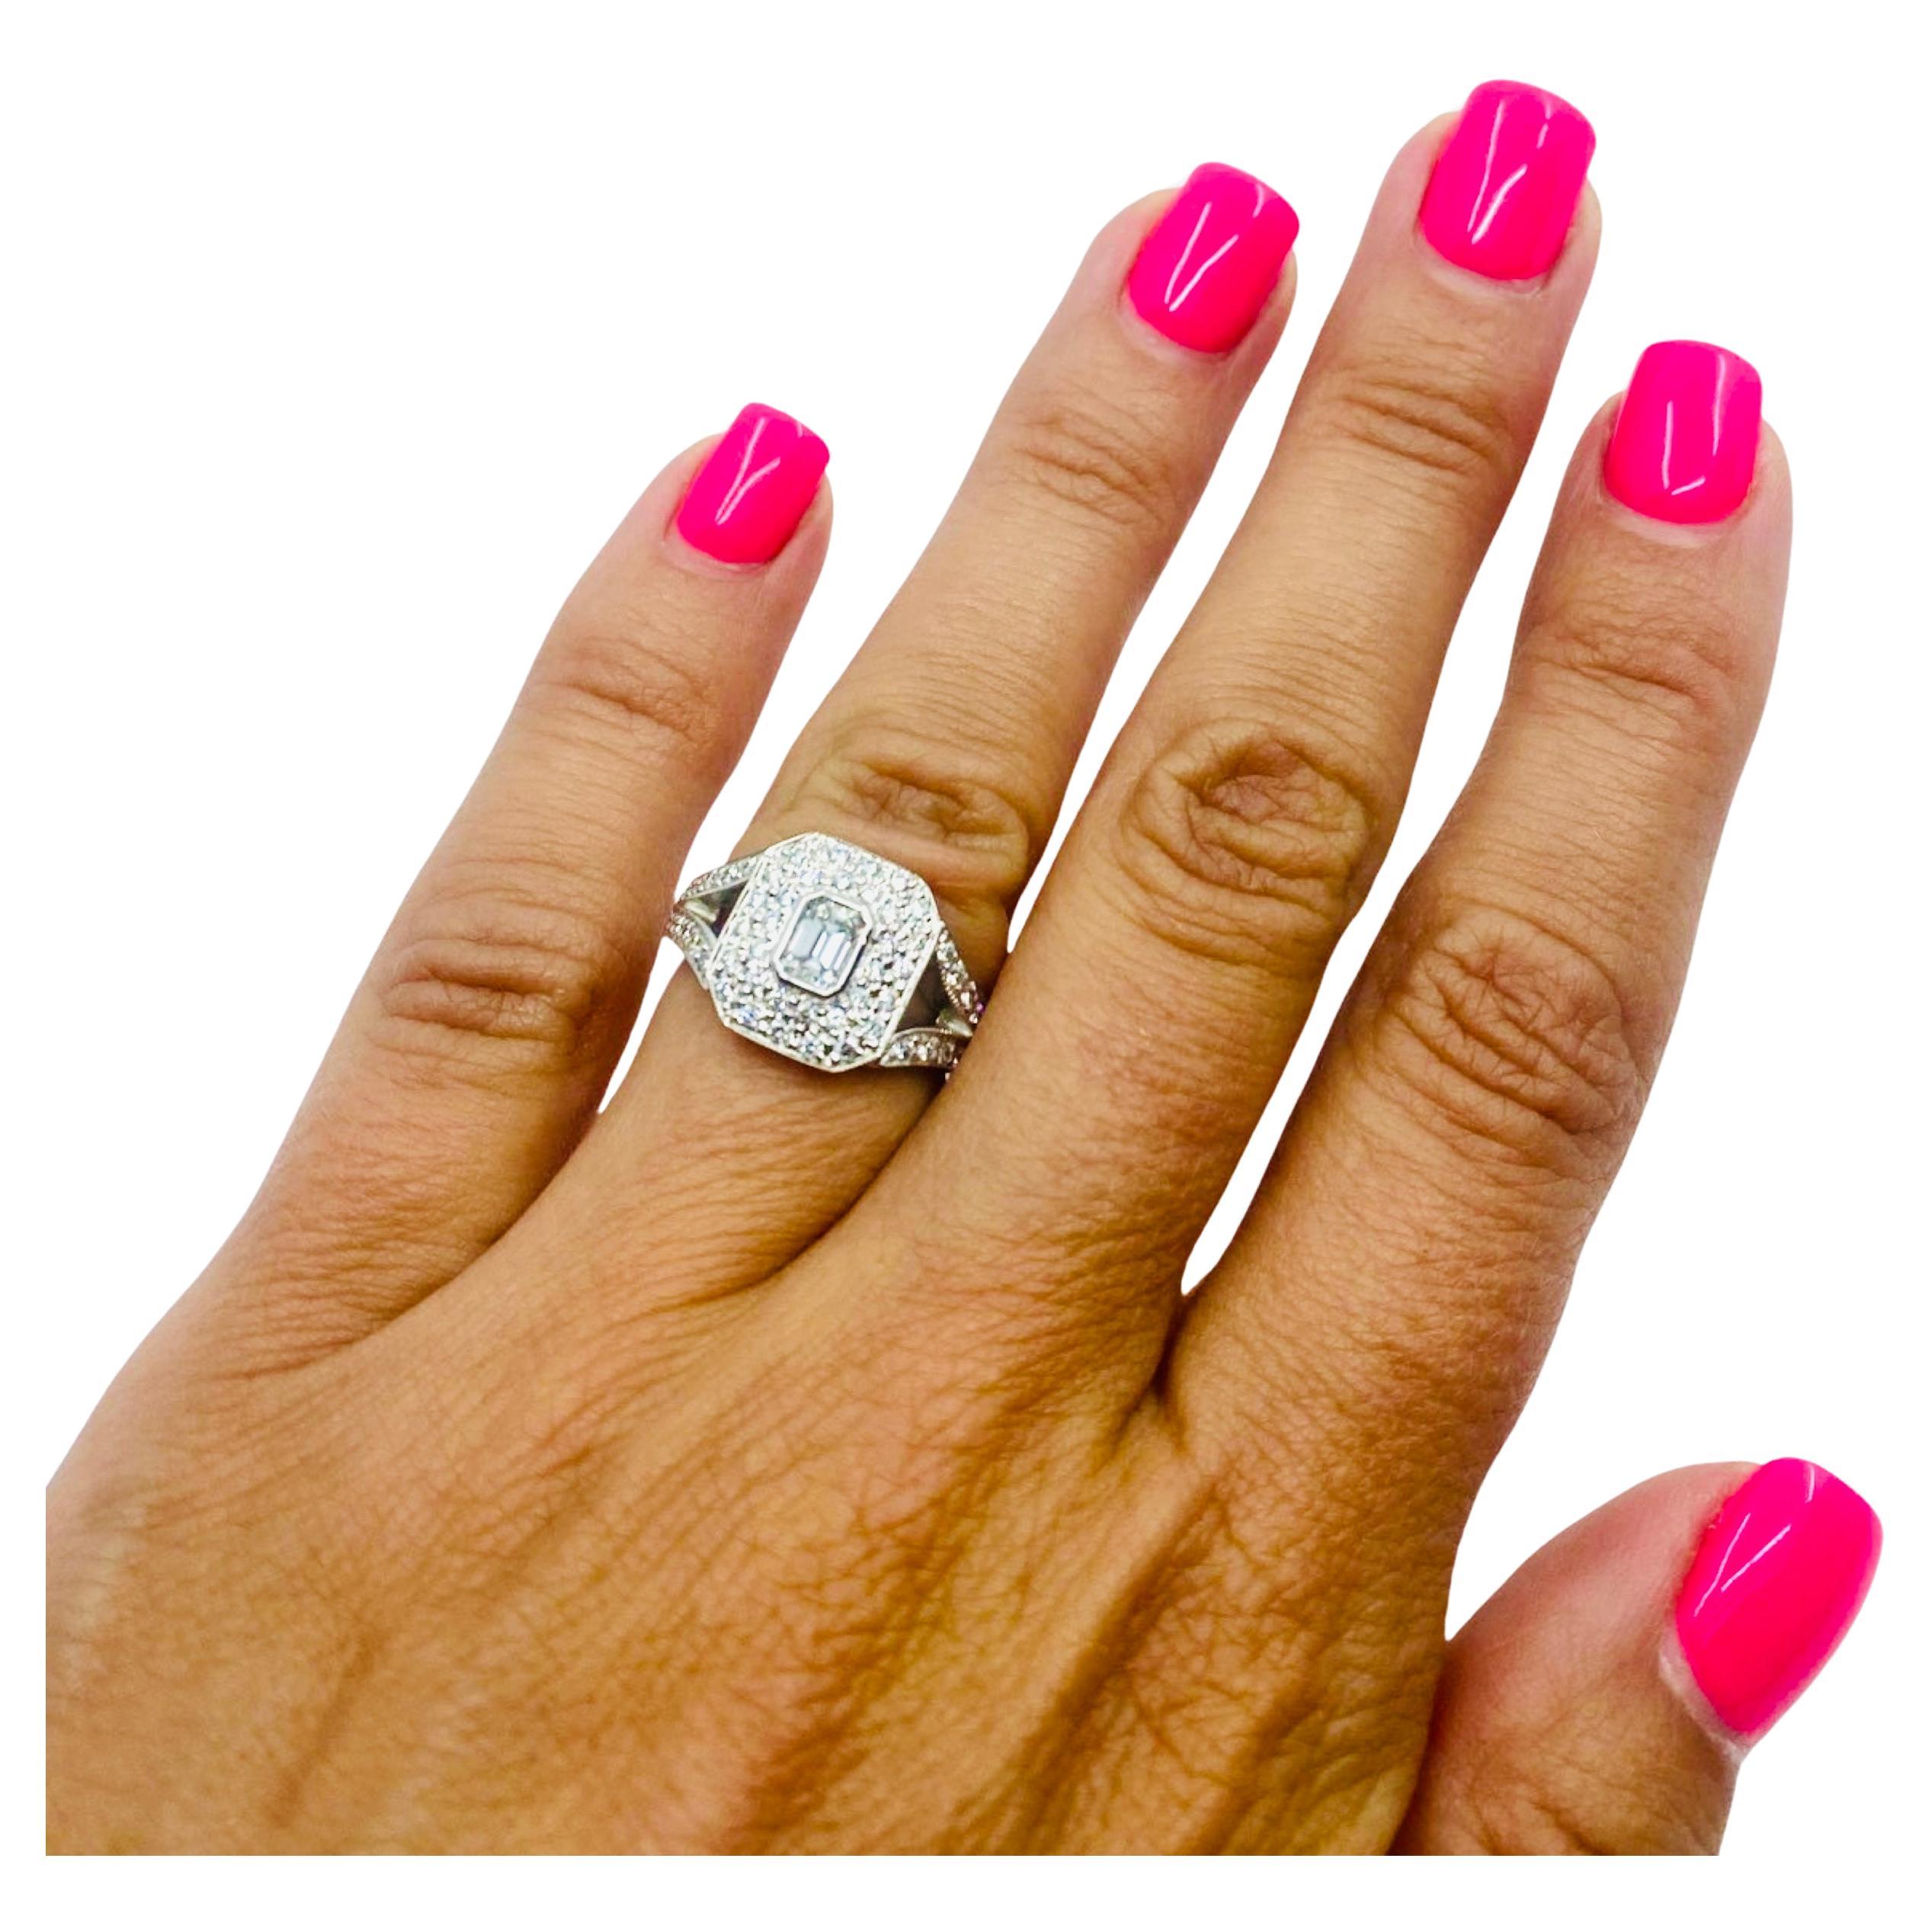 DESIGNER: Kwiat
CIRCA: 1990
MATERIALS: 18k White  Gold
GEMSTONE: Round Brilliant  Cut Diamond 
WEIGHT: 6.1 grams
RING SIZE: 5.5

A classic Kwiat diamond engagement ring in 18k white gold. The ring of a rectangular shape has an emerald cut diamond